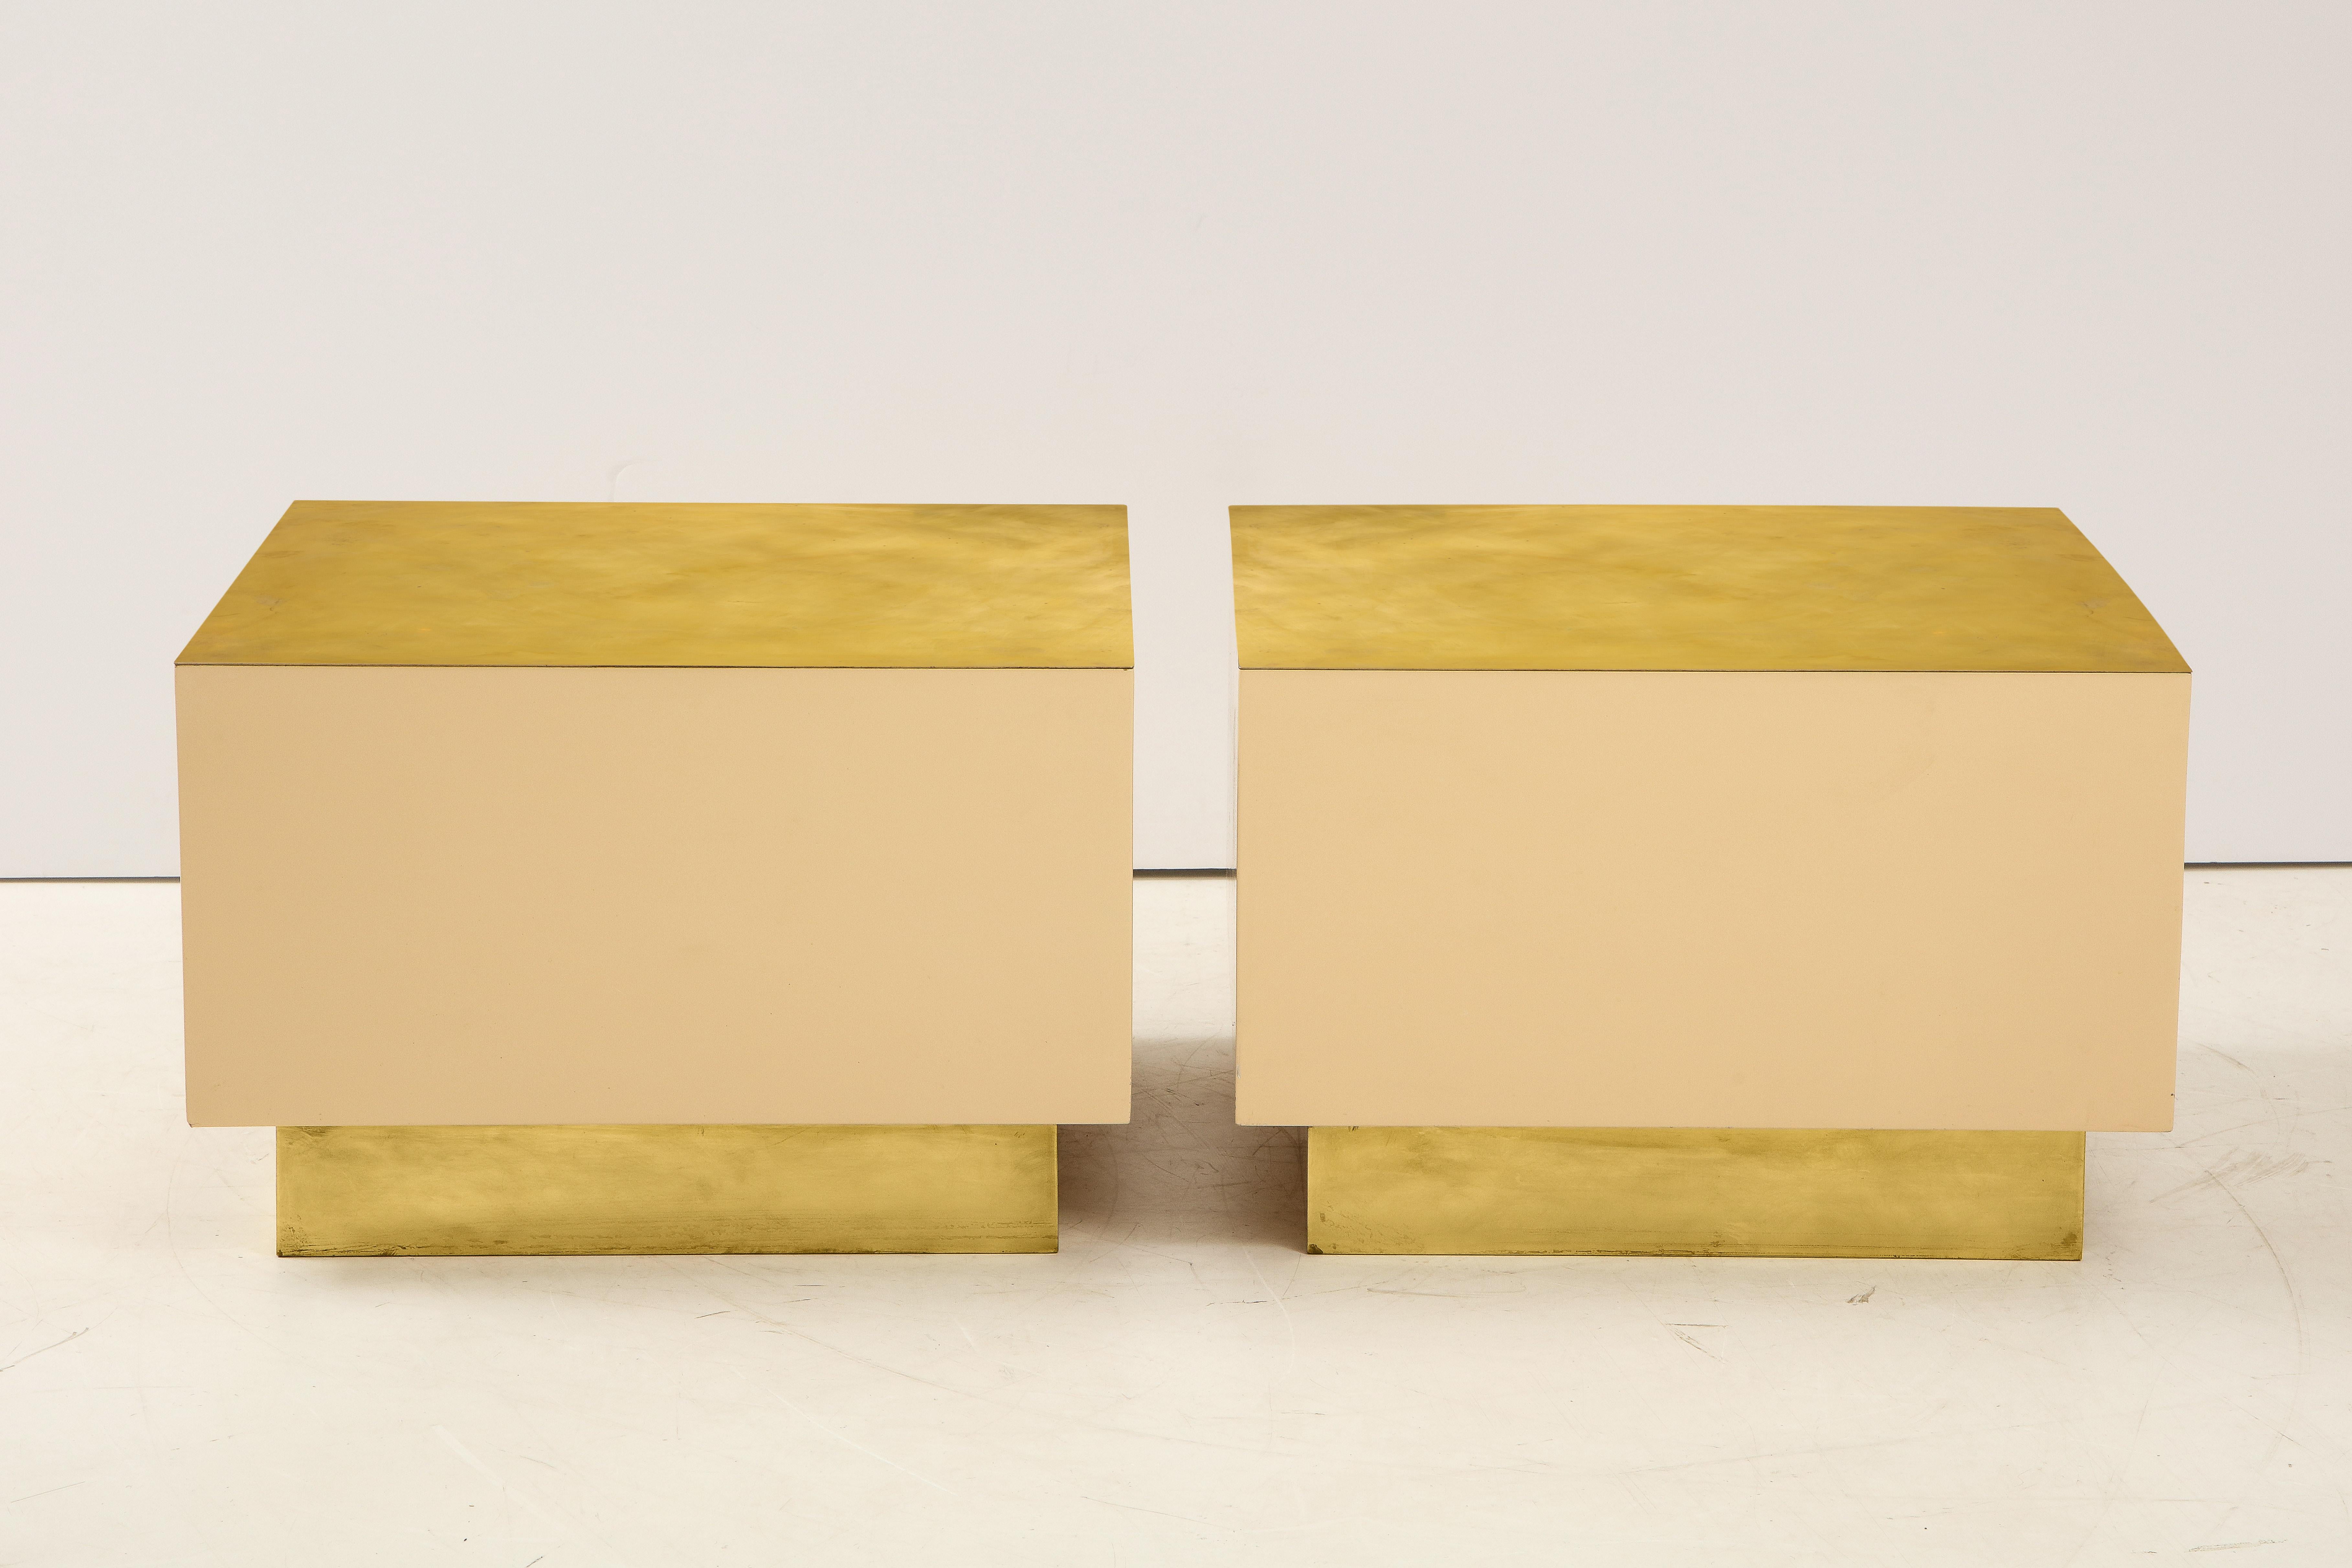 A pair of Italian 1970s brass and lacquer cube form coffee or cocktail tables; Minimalist and chic. The body is a creamy warm white lacquer, supported on a brass inset base and with brass surface: a color scheme that feels inherently glamourous.